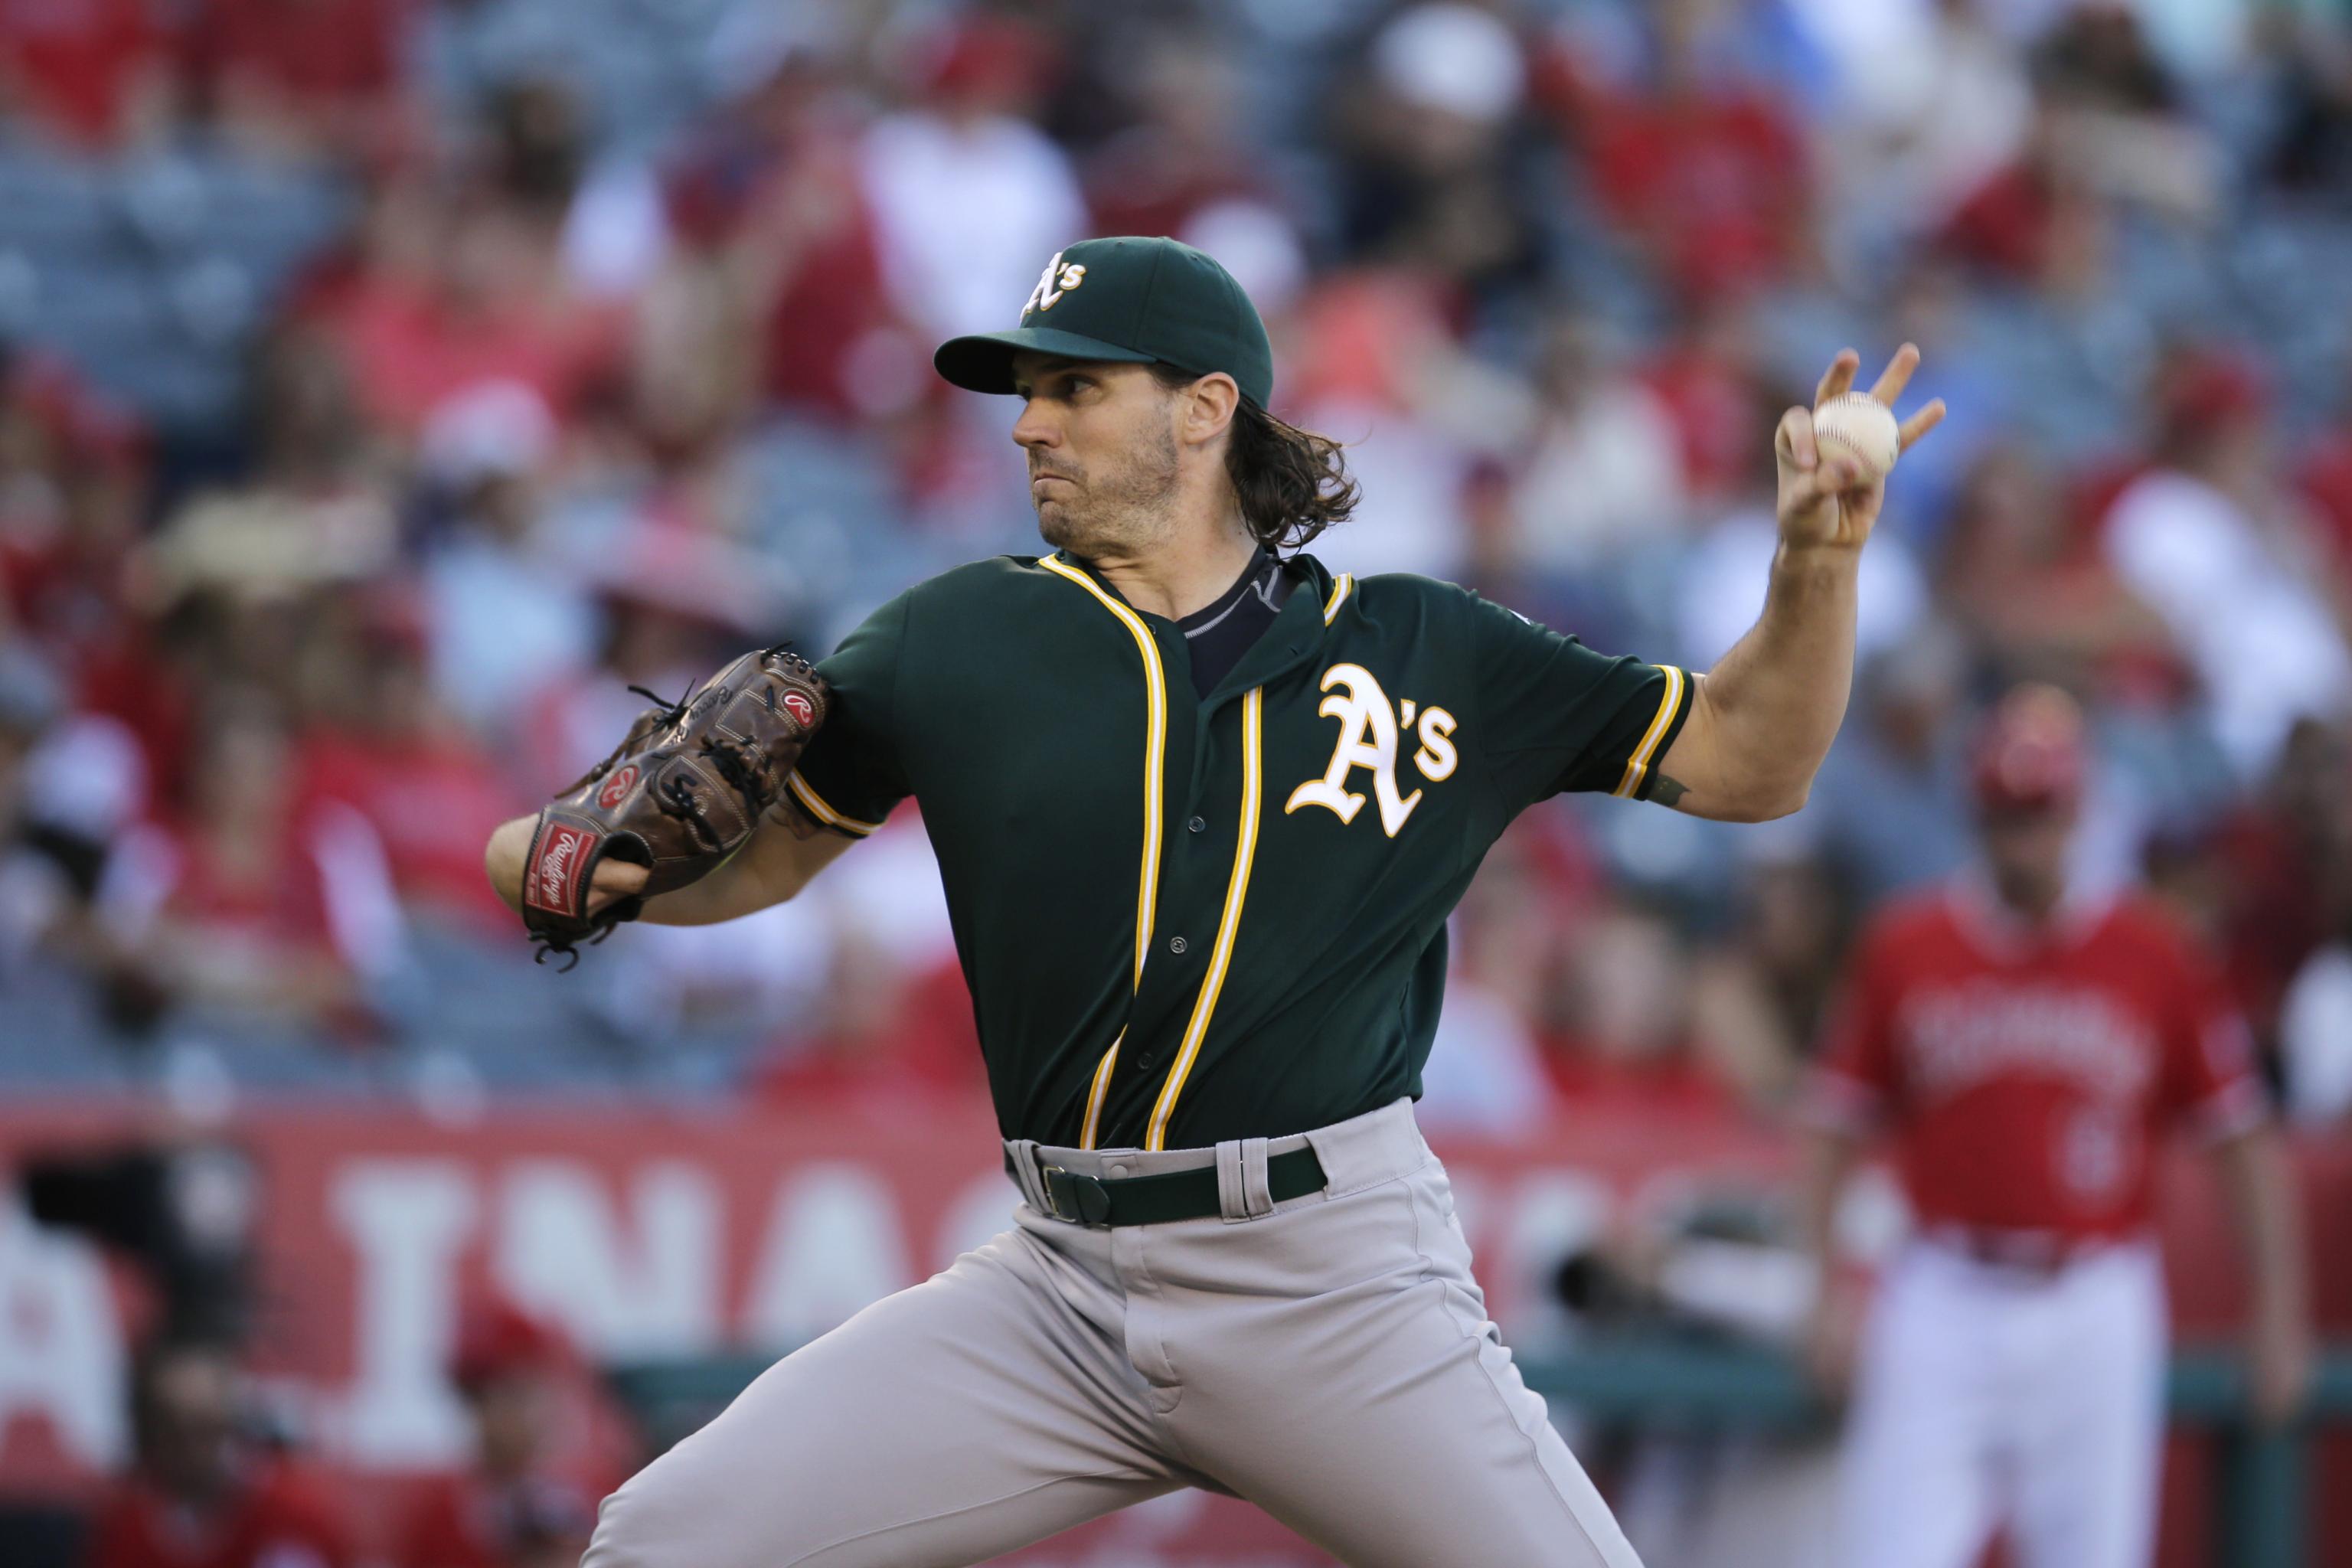 Thursday BP: The 8-year anniversary of Barry Zito's comeback